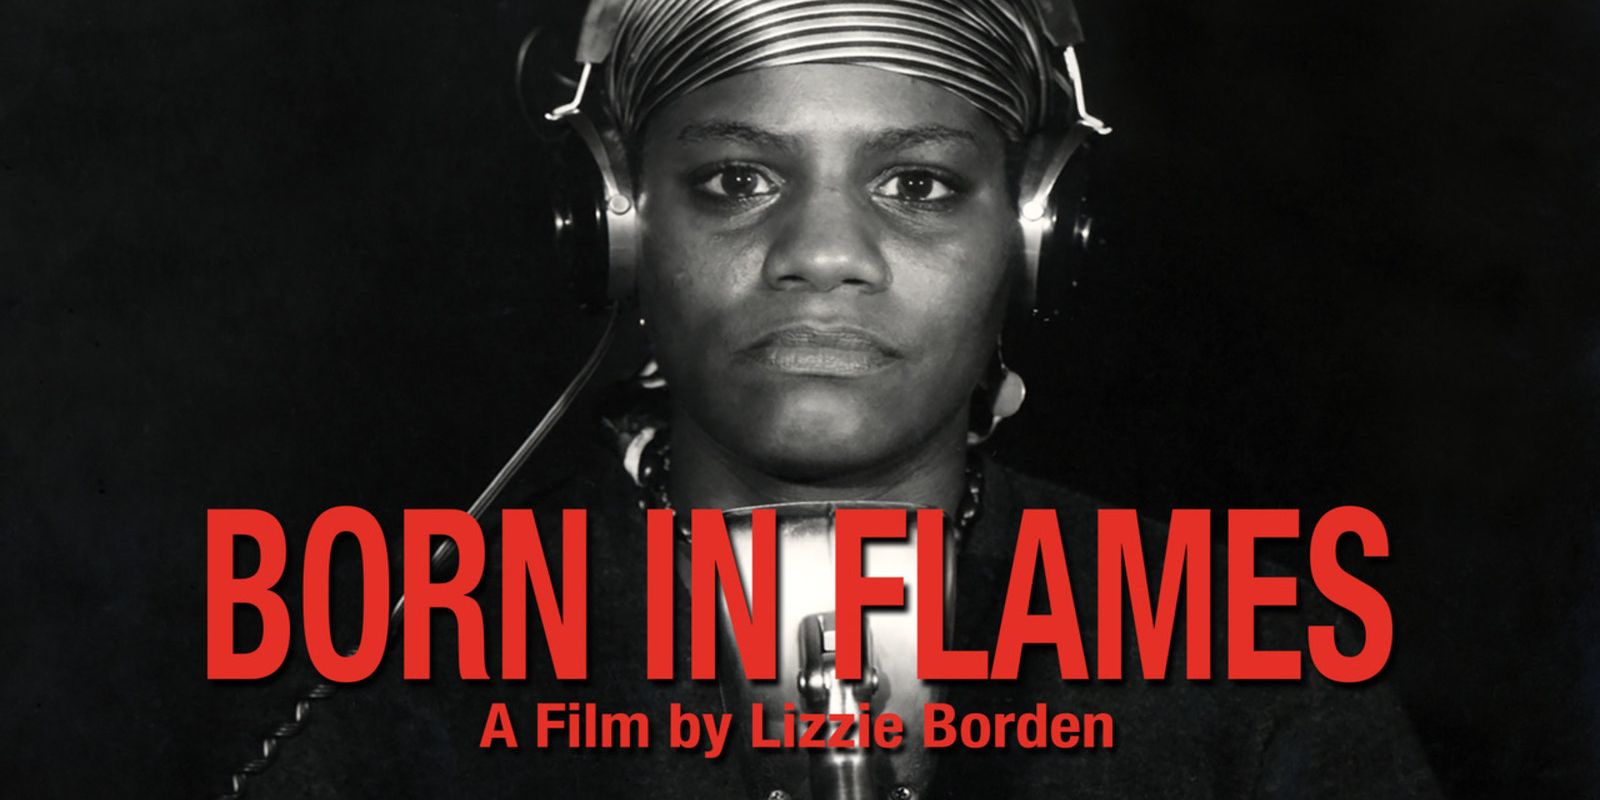 Lizzie Borden's Born in Flames title screen showing the title, director's name, and Adelaide Norris